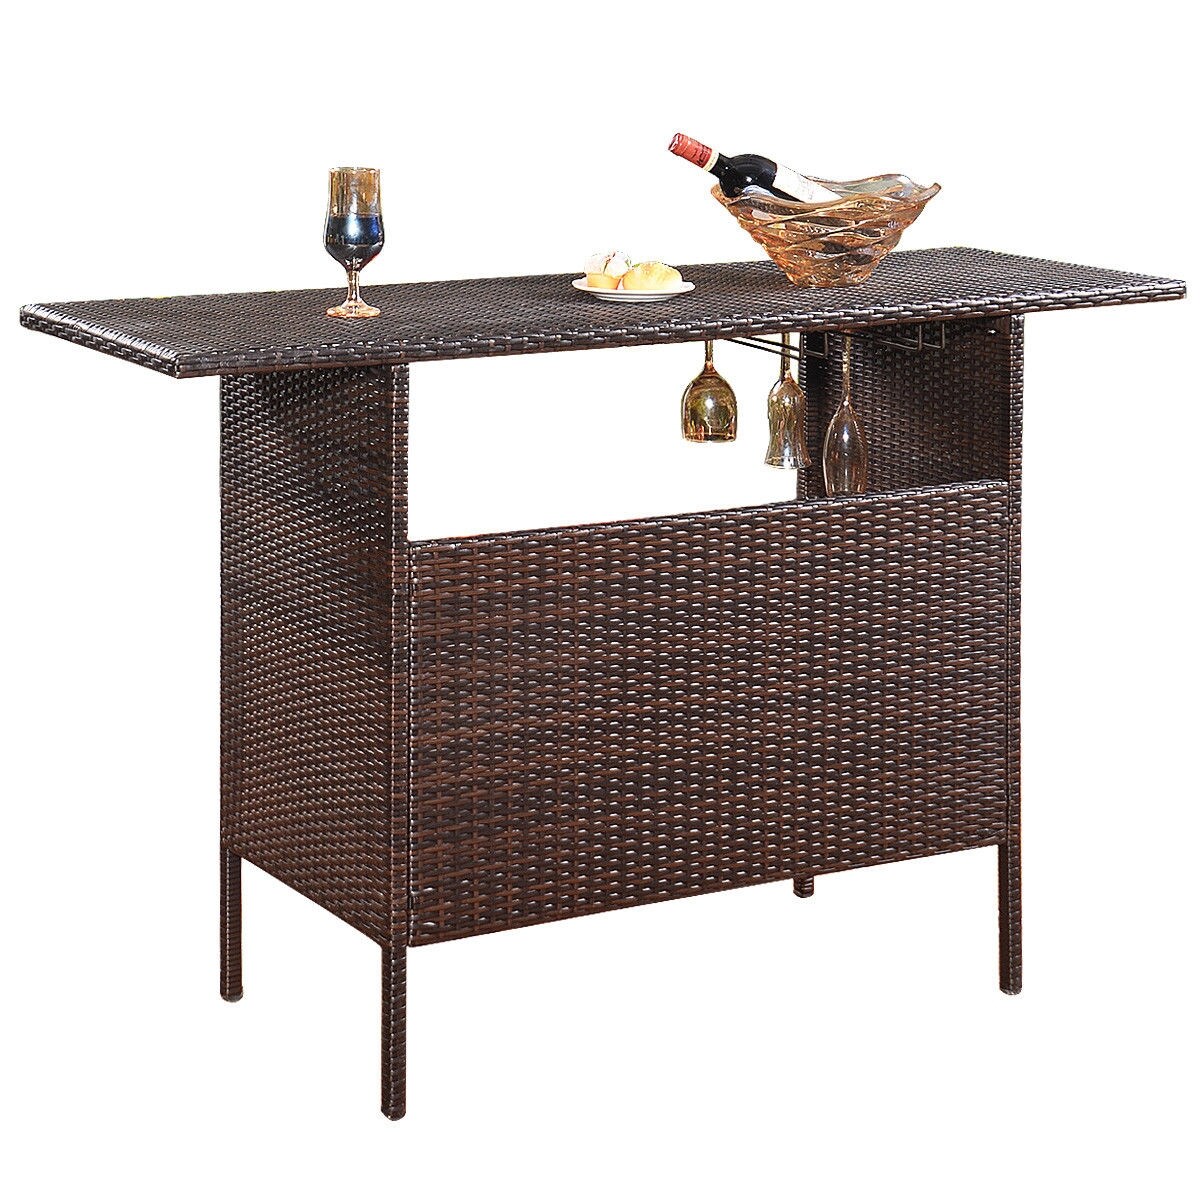 CASAINC Rectangle Rattan Outdoor Bar Height Table 18.5-in W x 55.1-in L